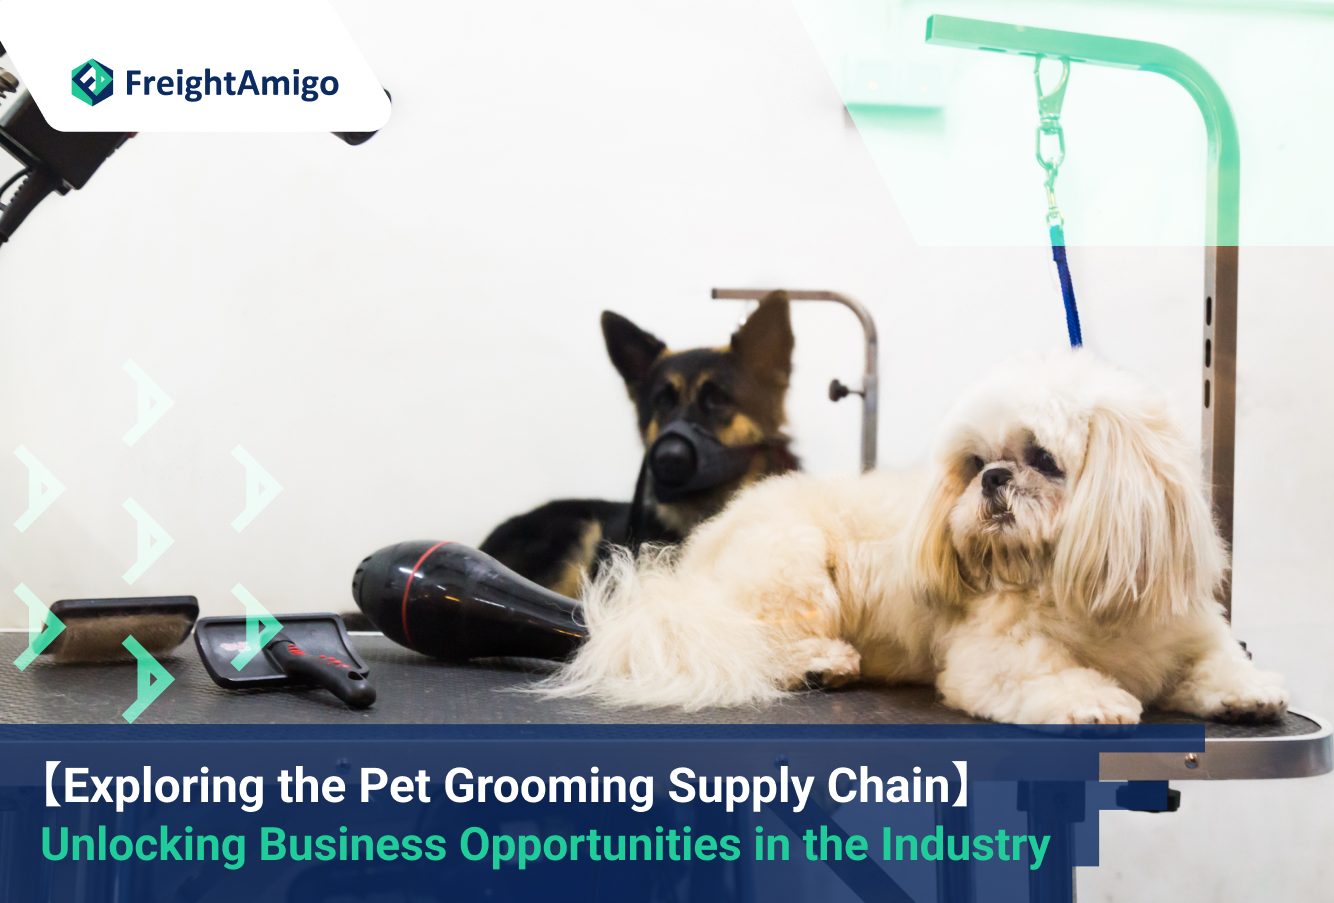 Pet Grooming Products, FreightAmigo